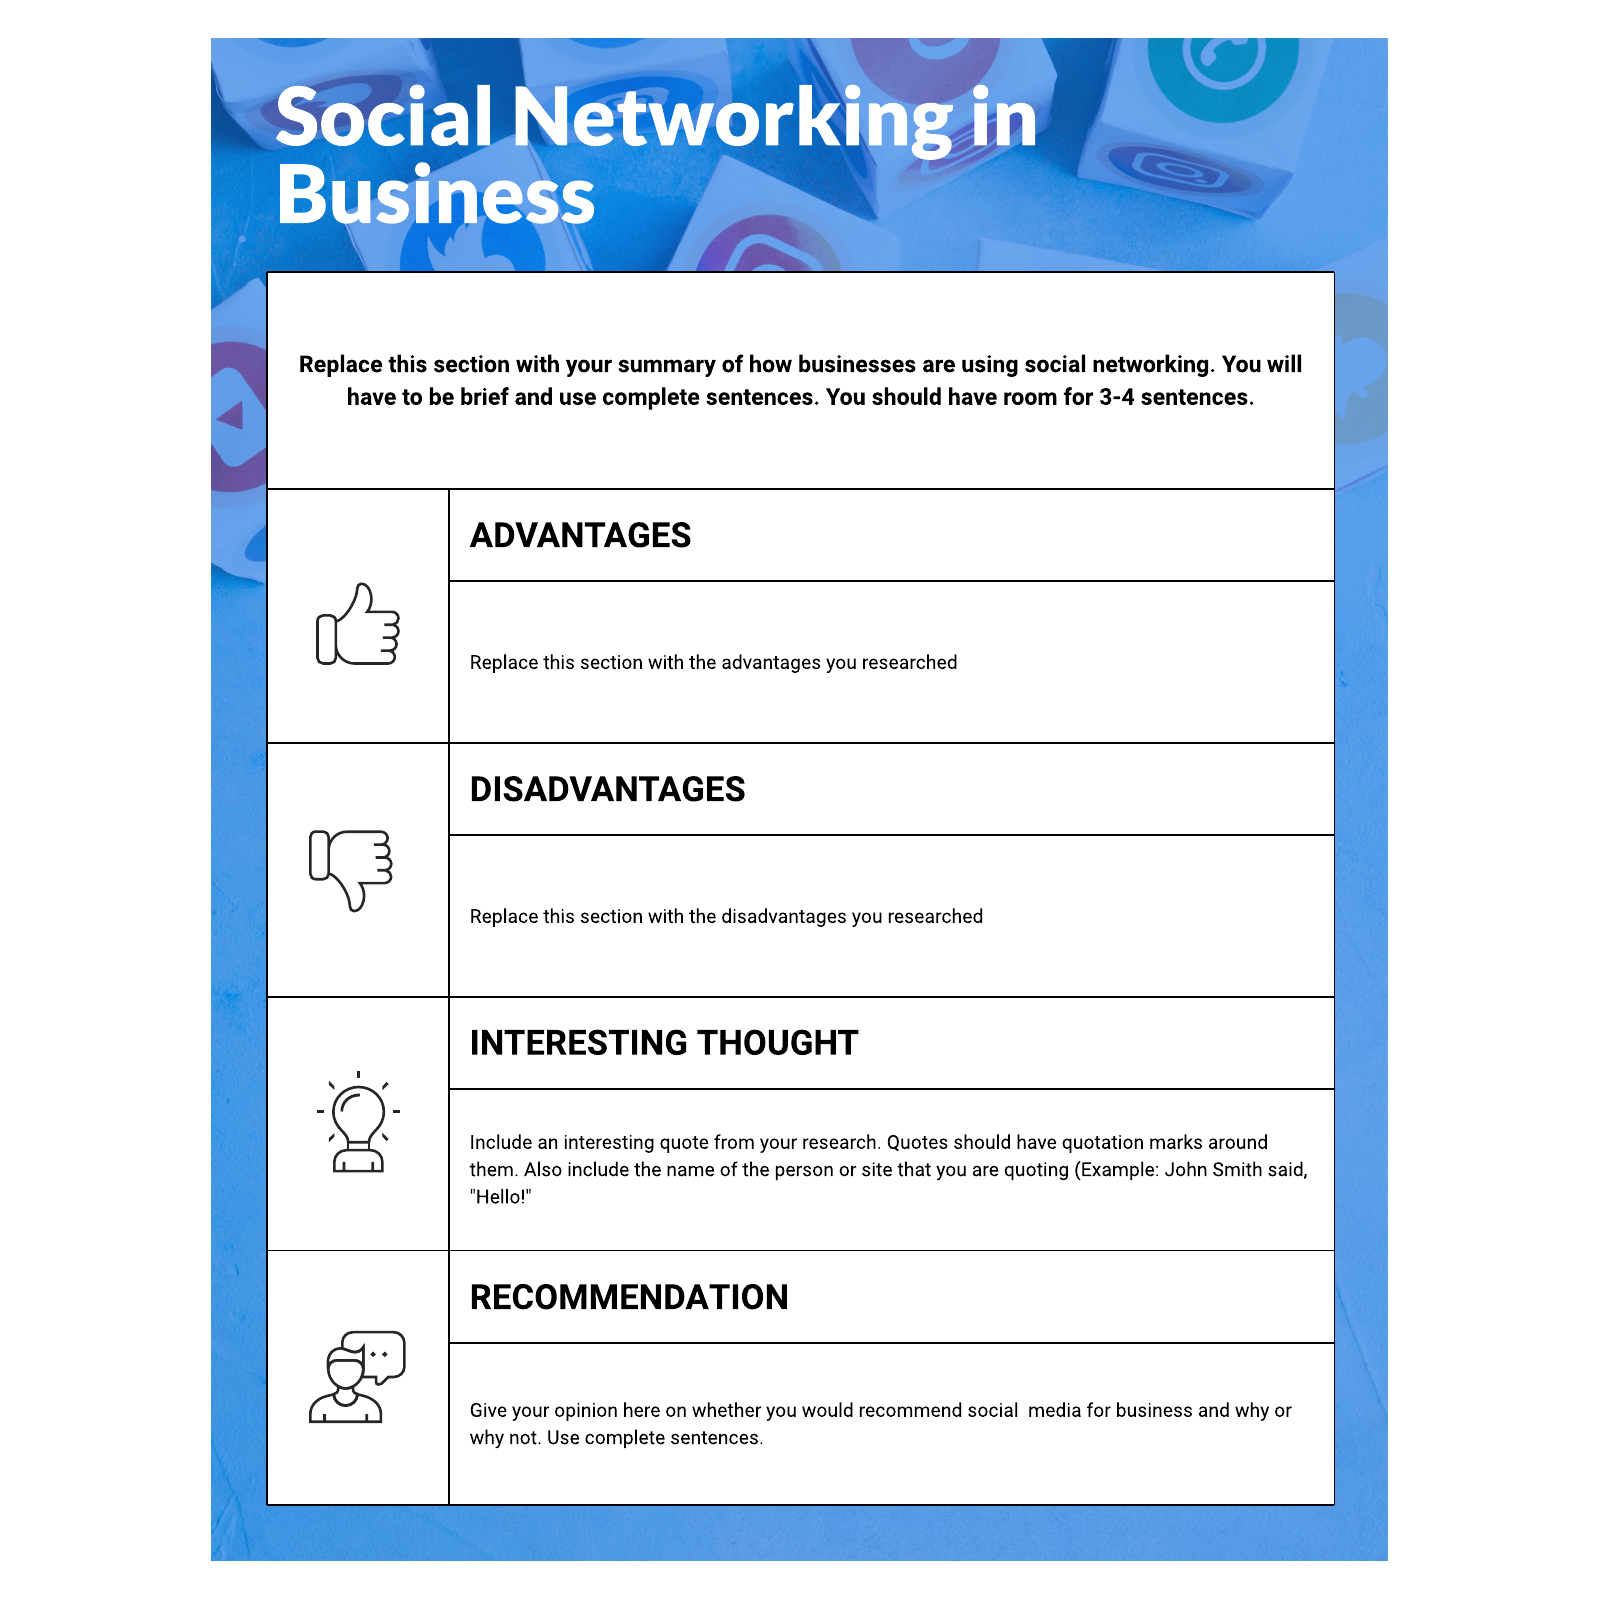 Social networking in business example